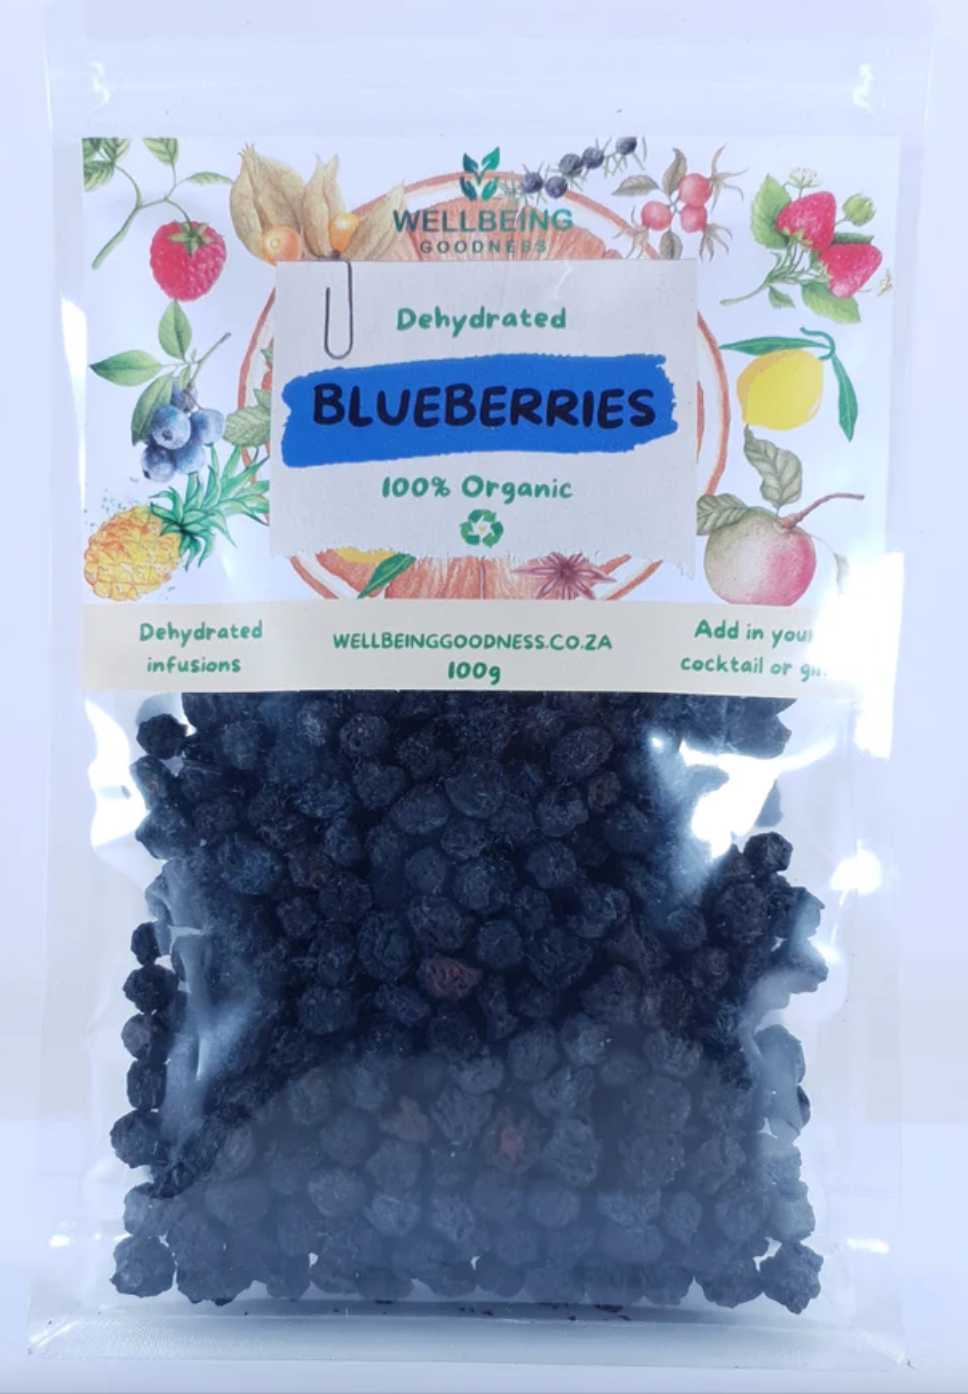 Dehydrated Blueberries Wellbeing Goodness